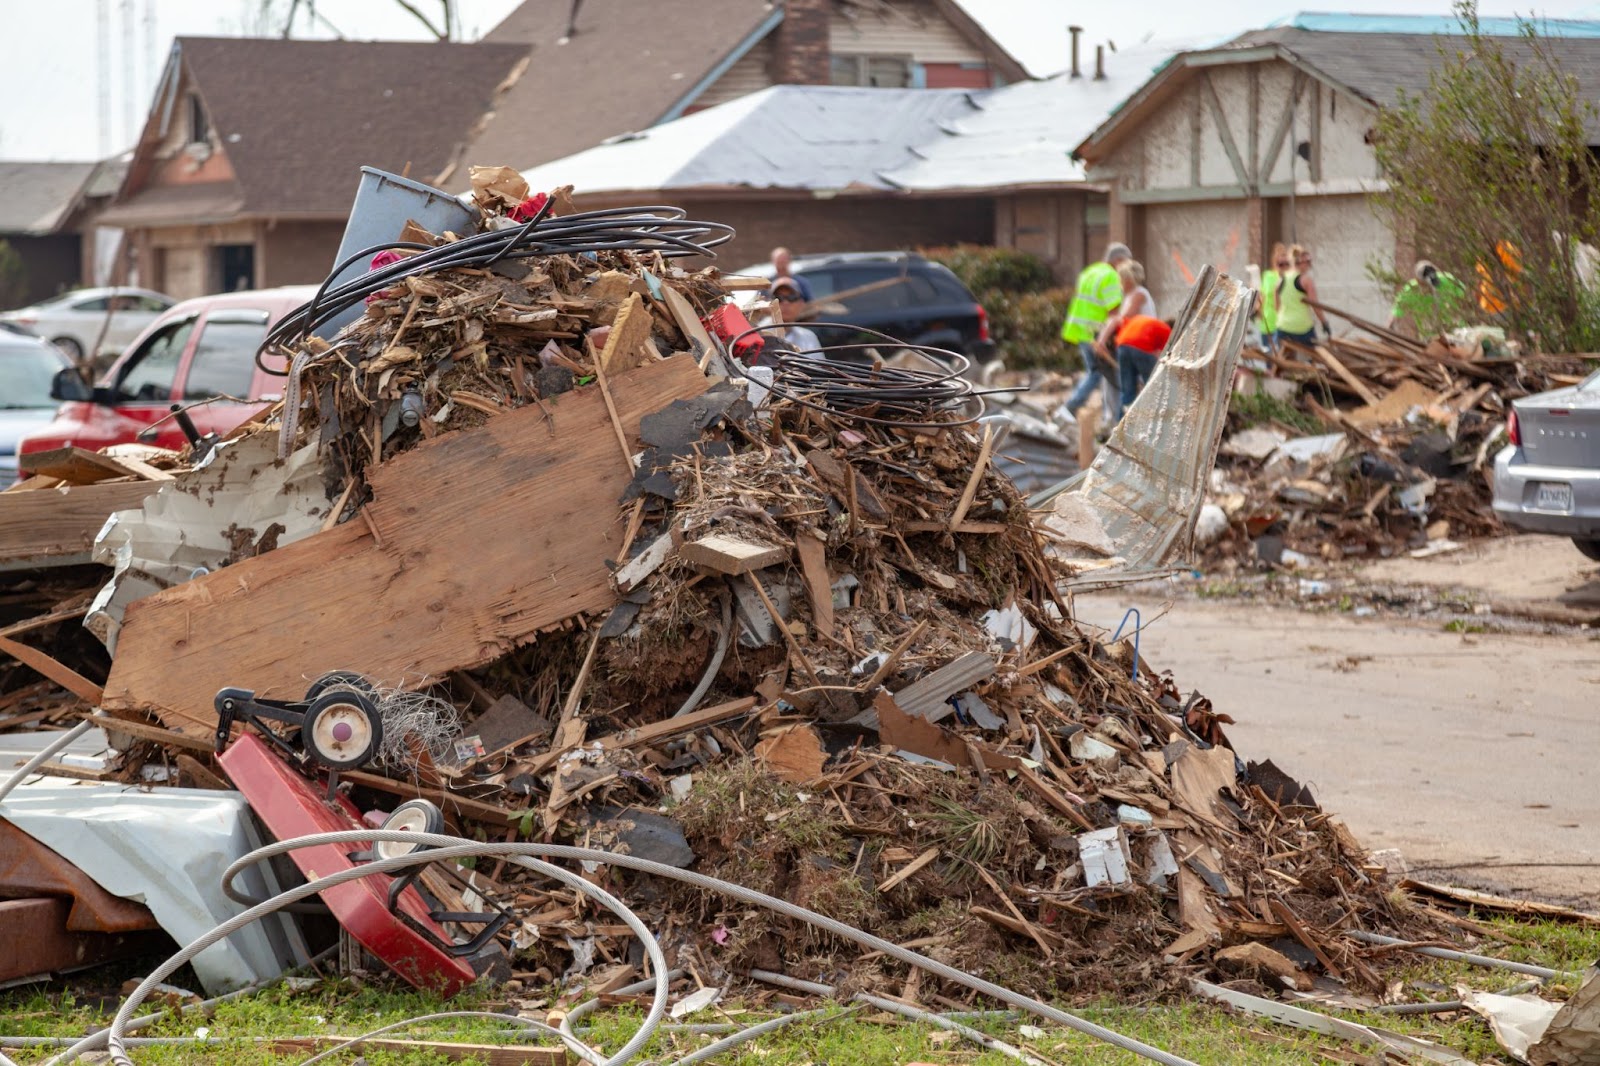 A pile of debris in a residential area, with remnants of Bowling Alley Food scattered around.